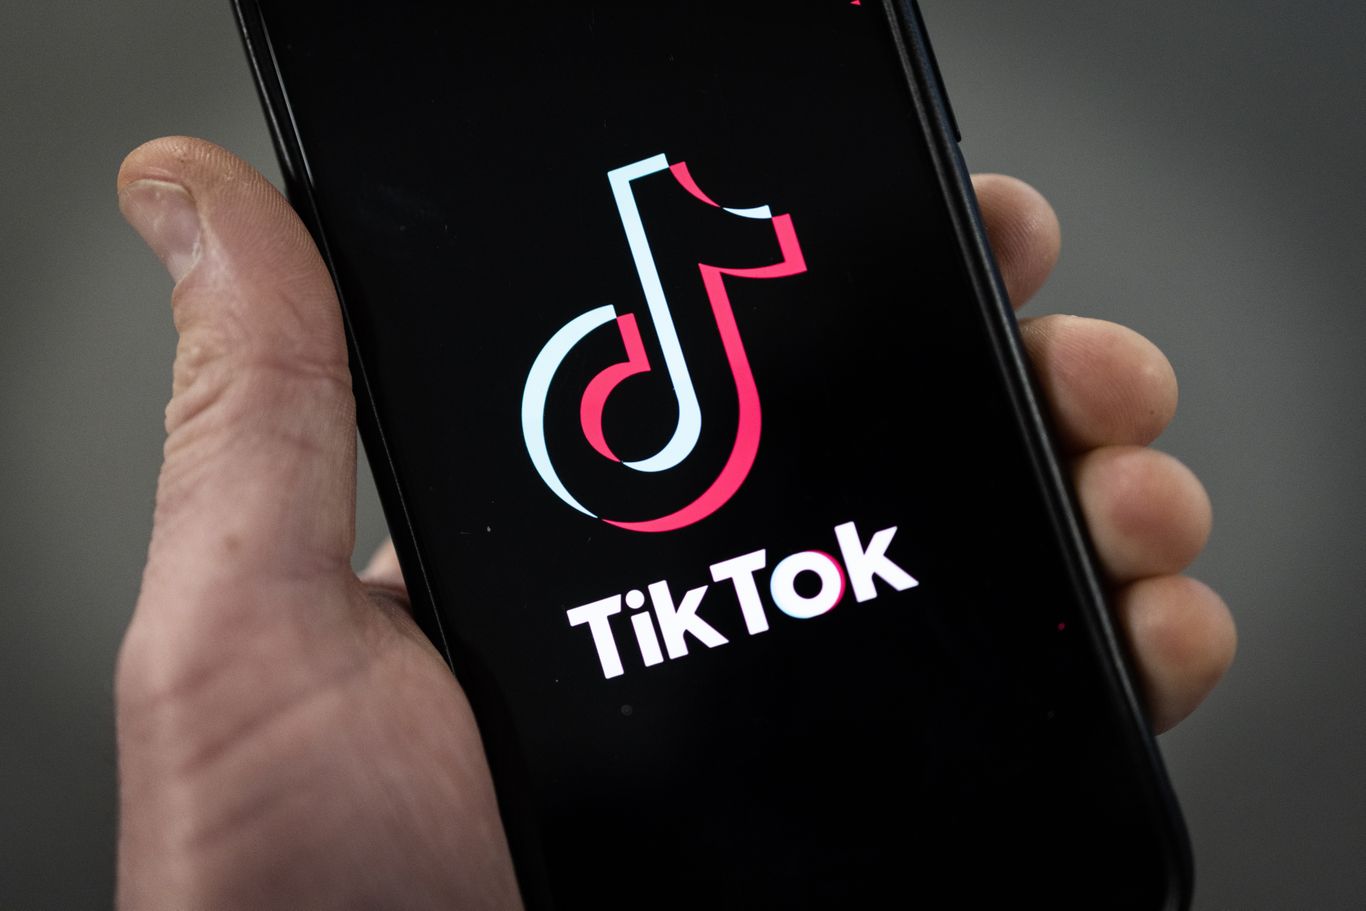 The political realities that make a national TikTok ban tricky